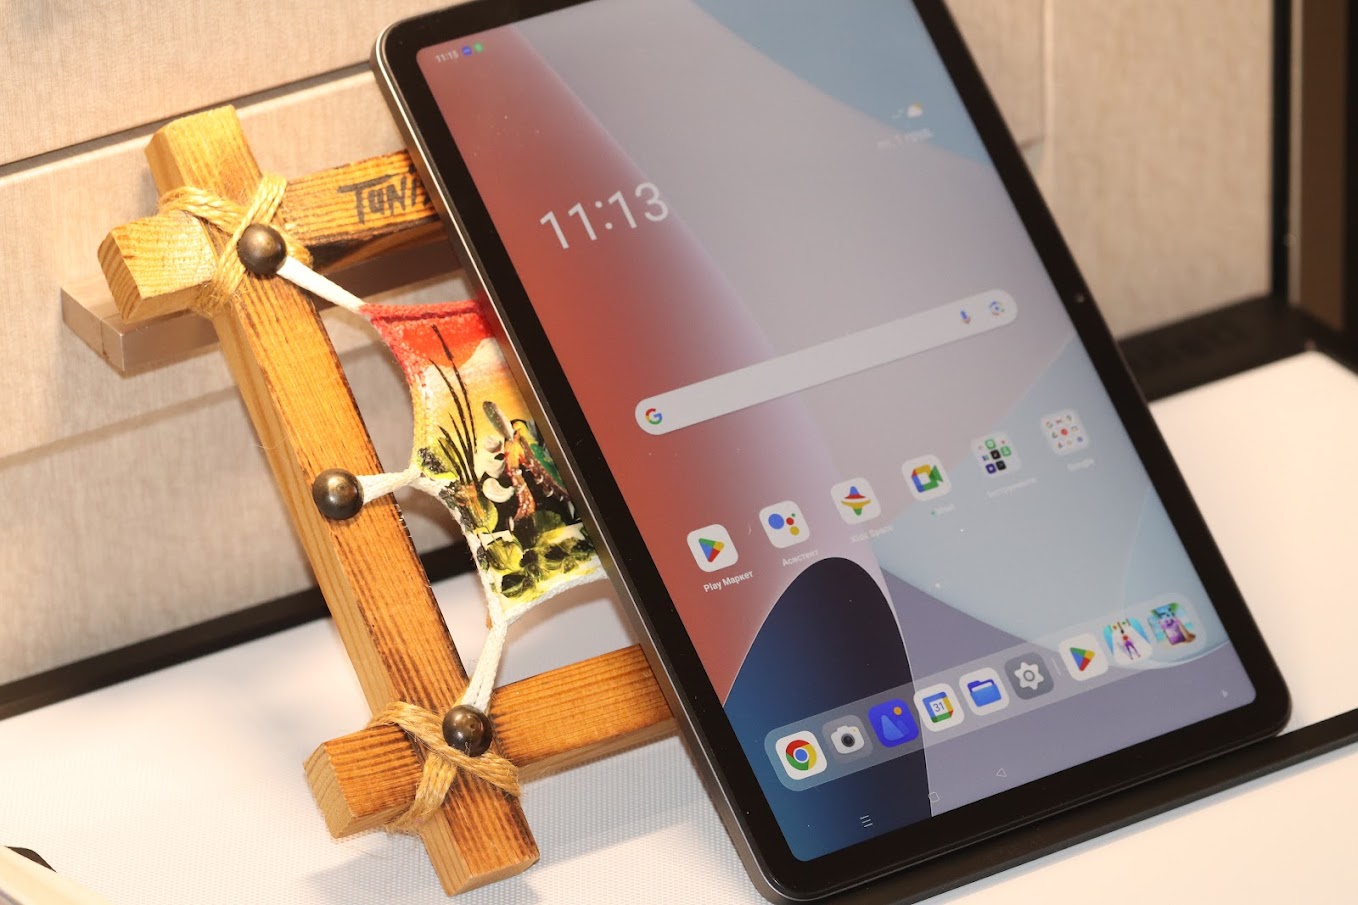 OPPO Pad Air has a display with a diagonal of 10.36 inches